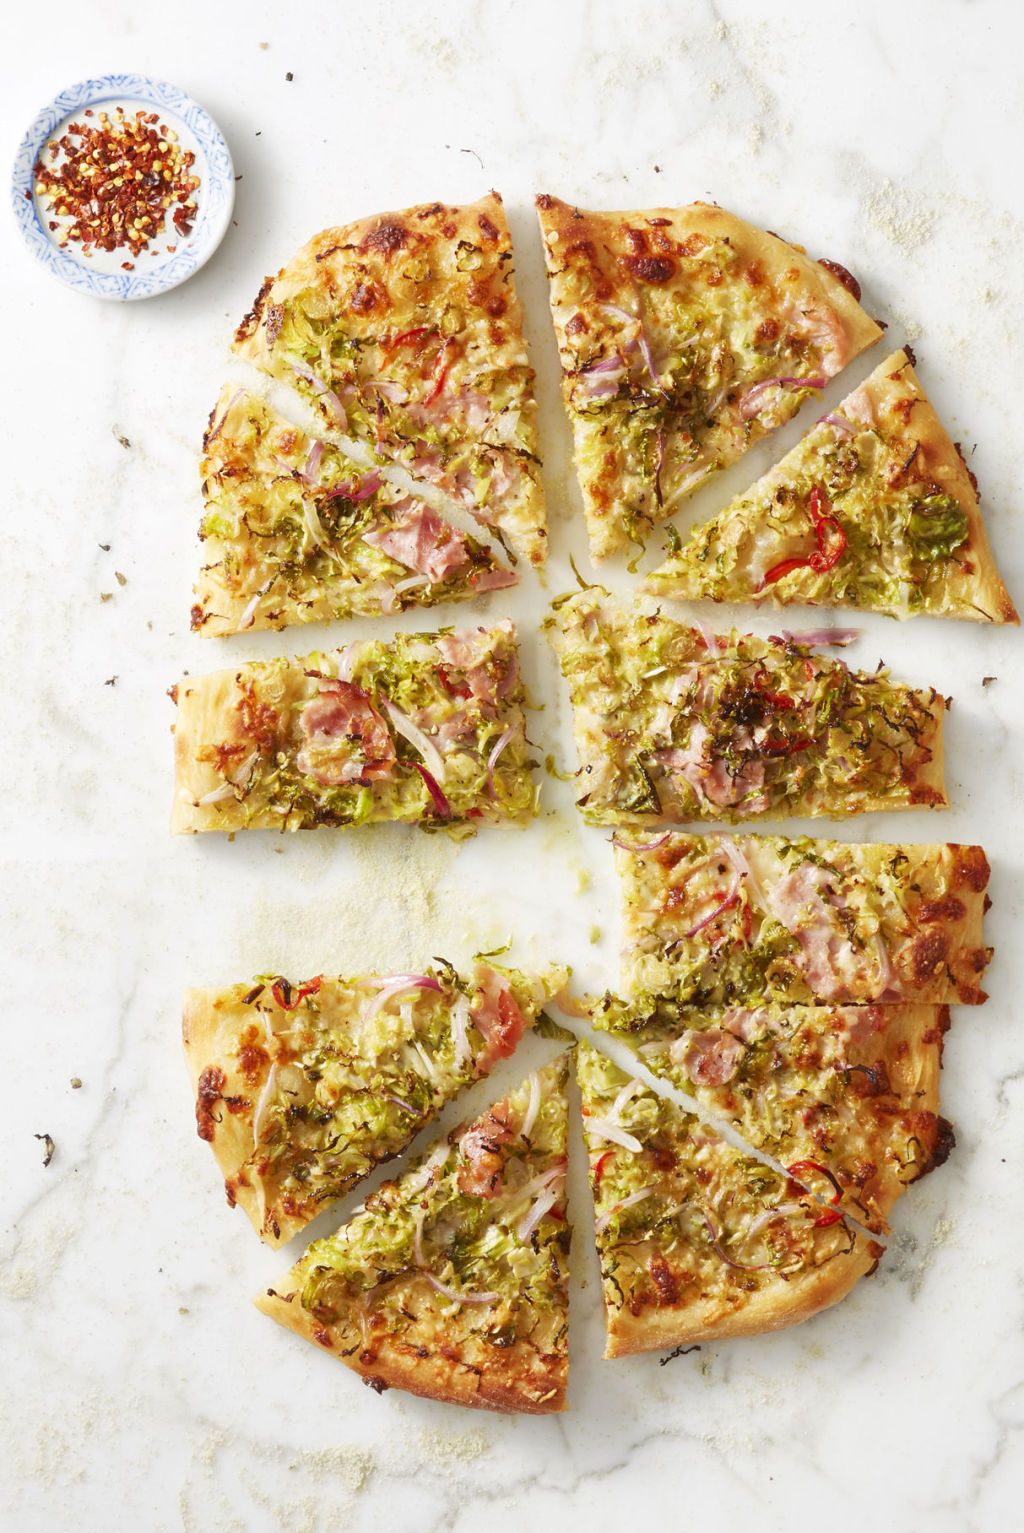 white pizza with brussels sprouts and bacon valentine's day dinner ideas